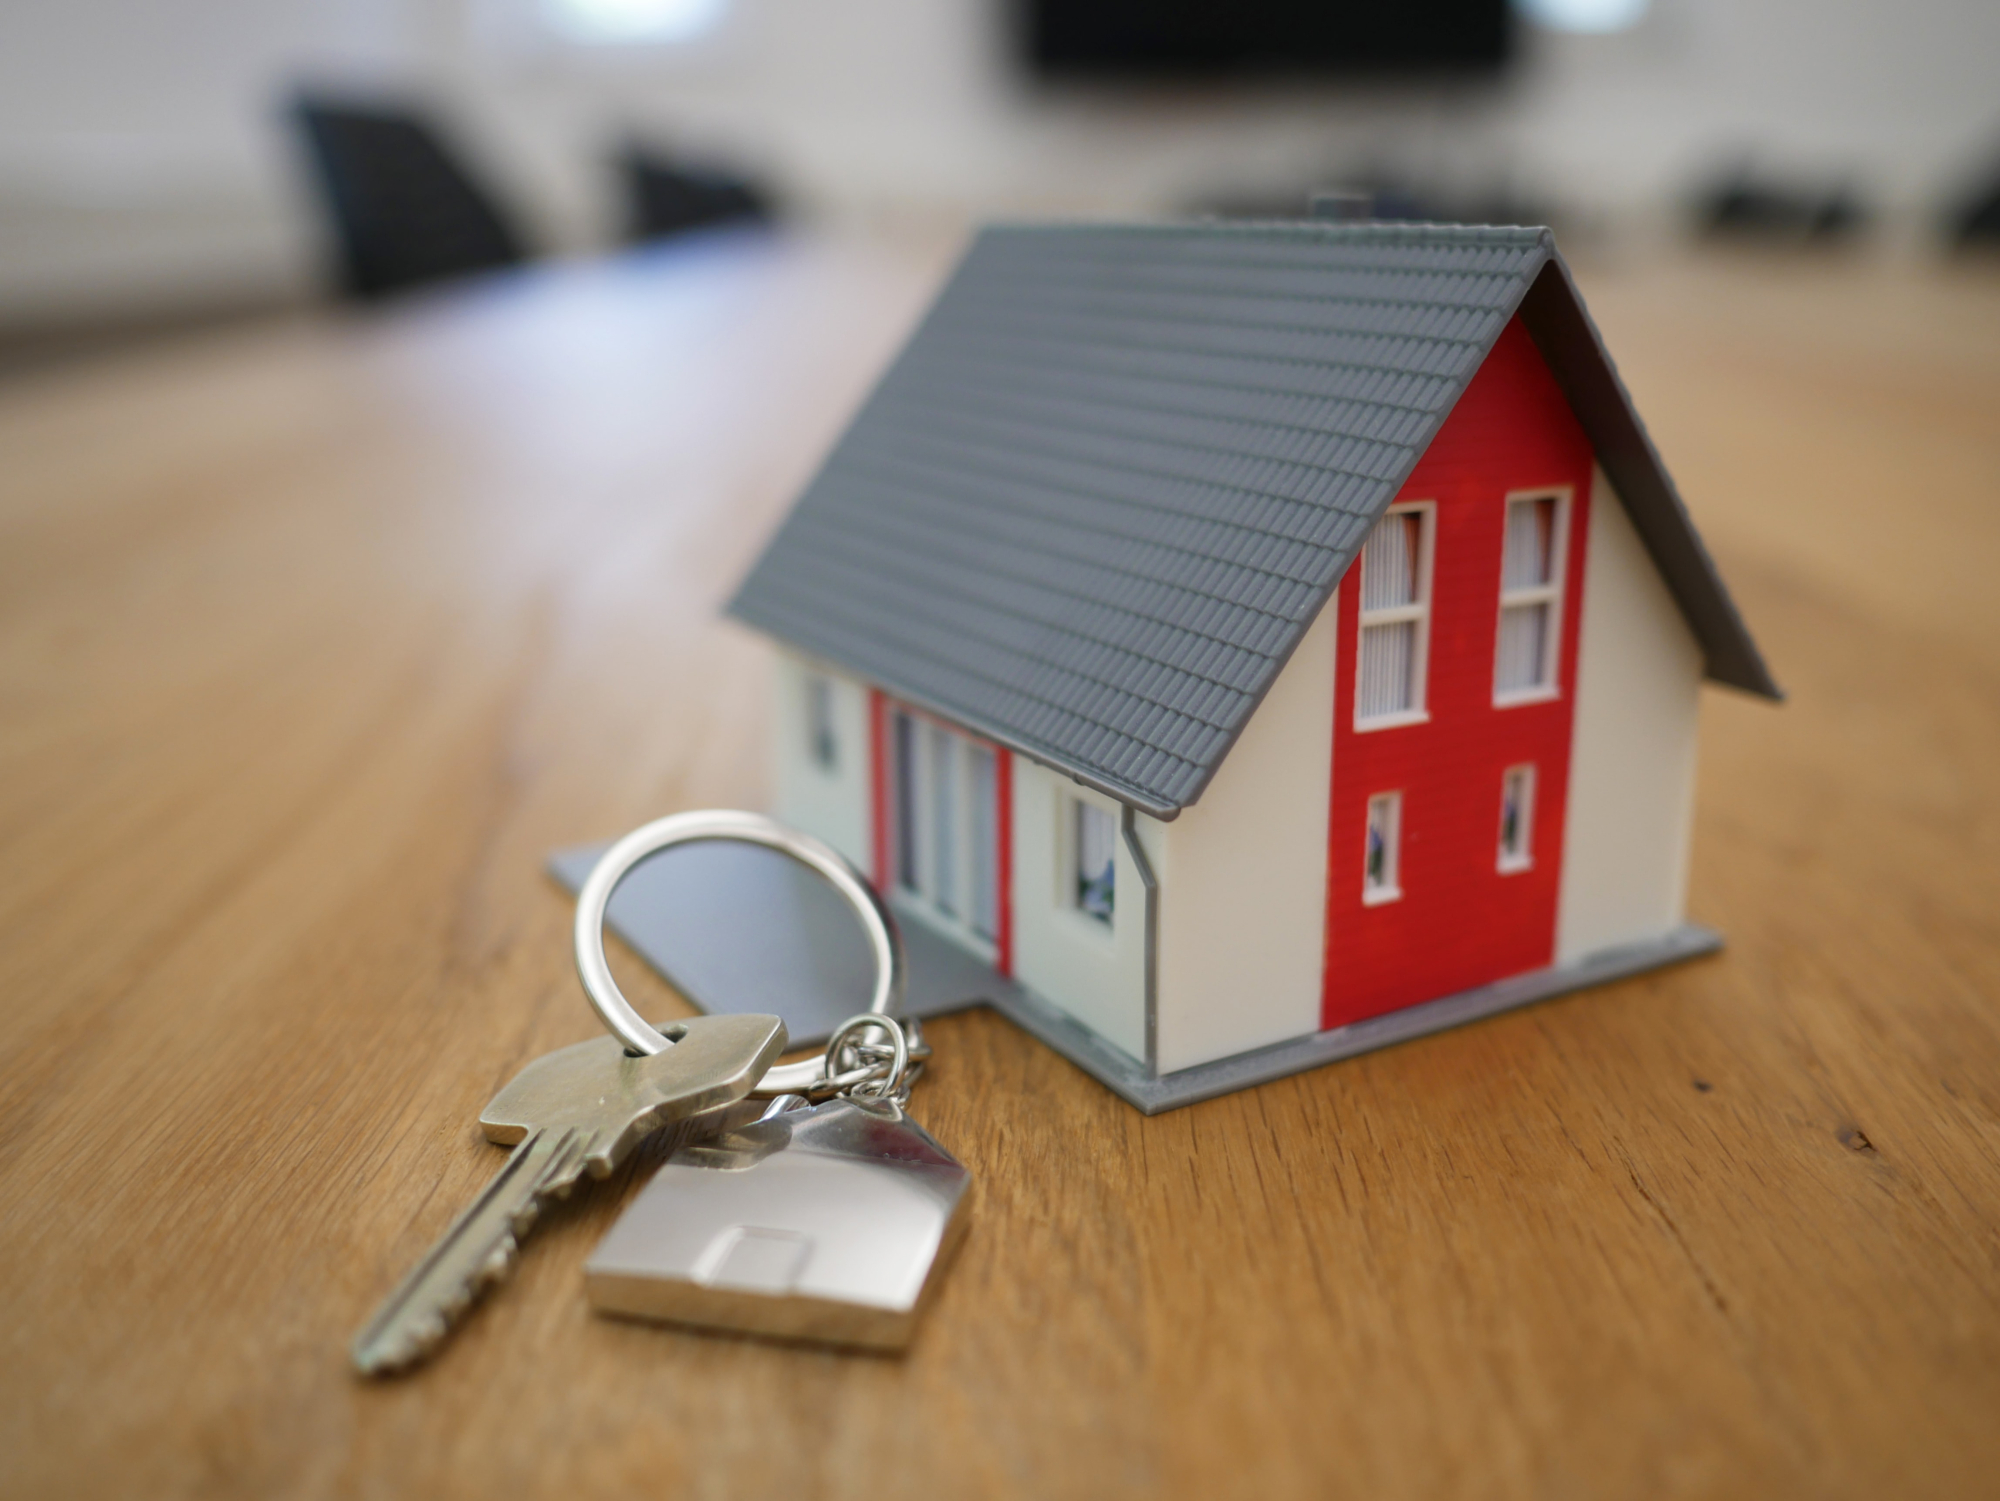 Keys to a home and toy house on a table.